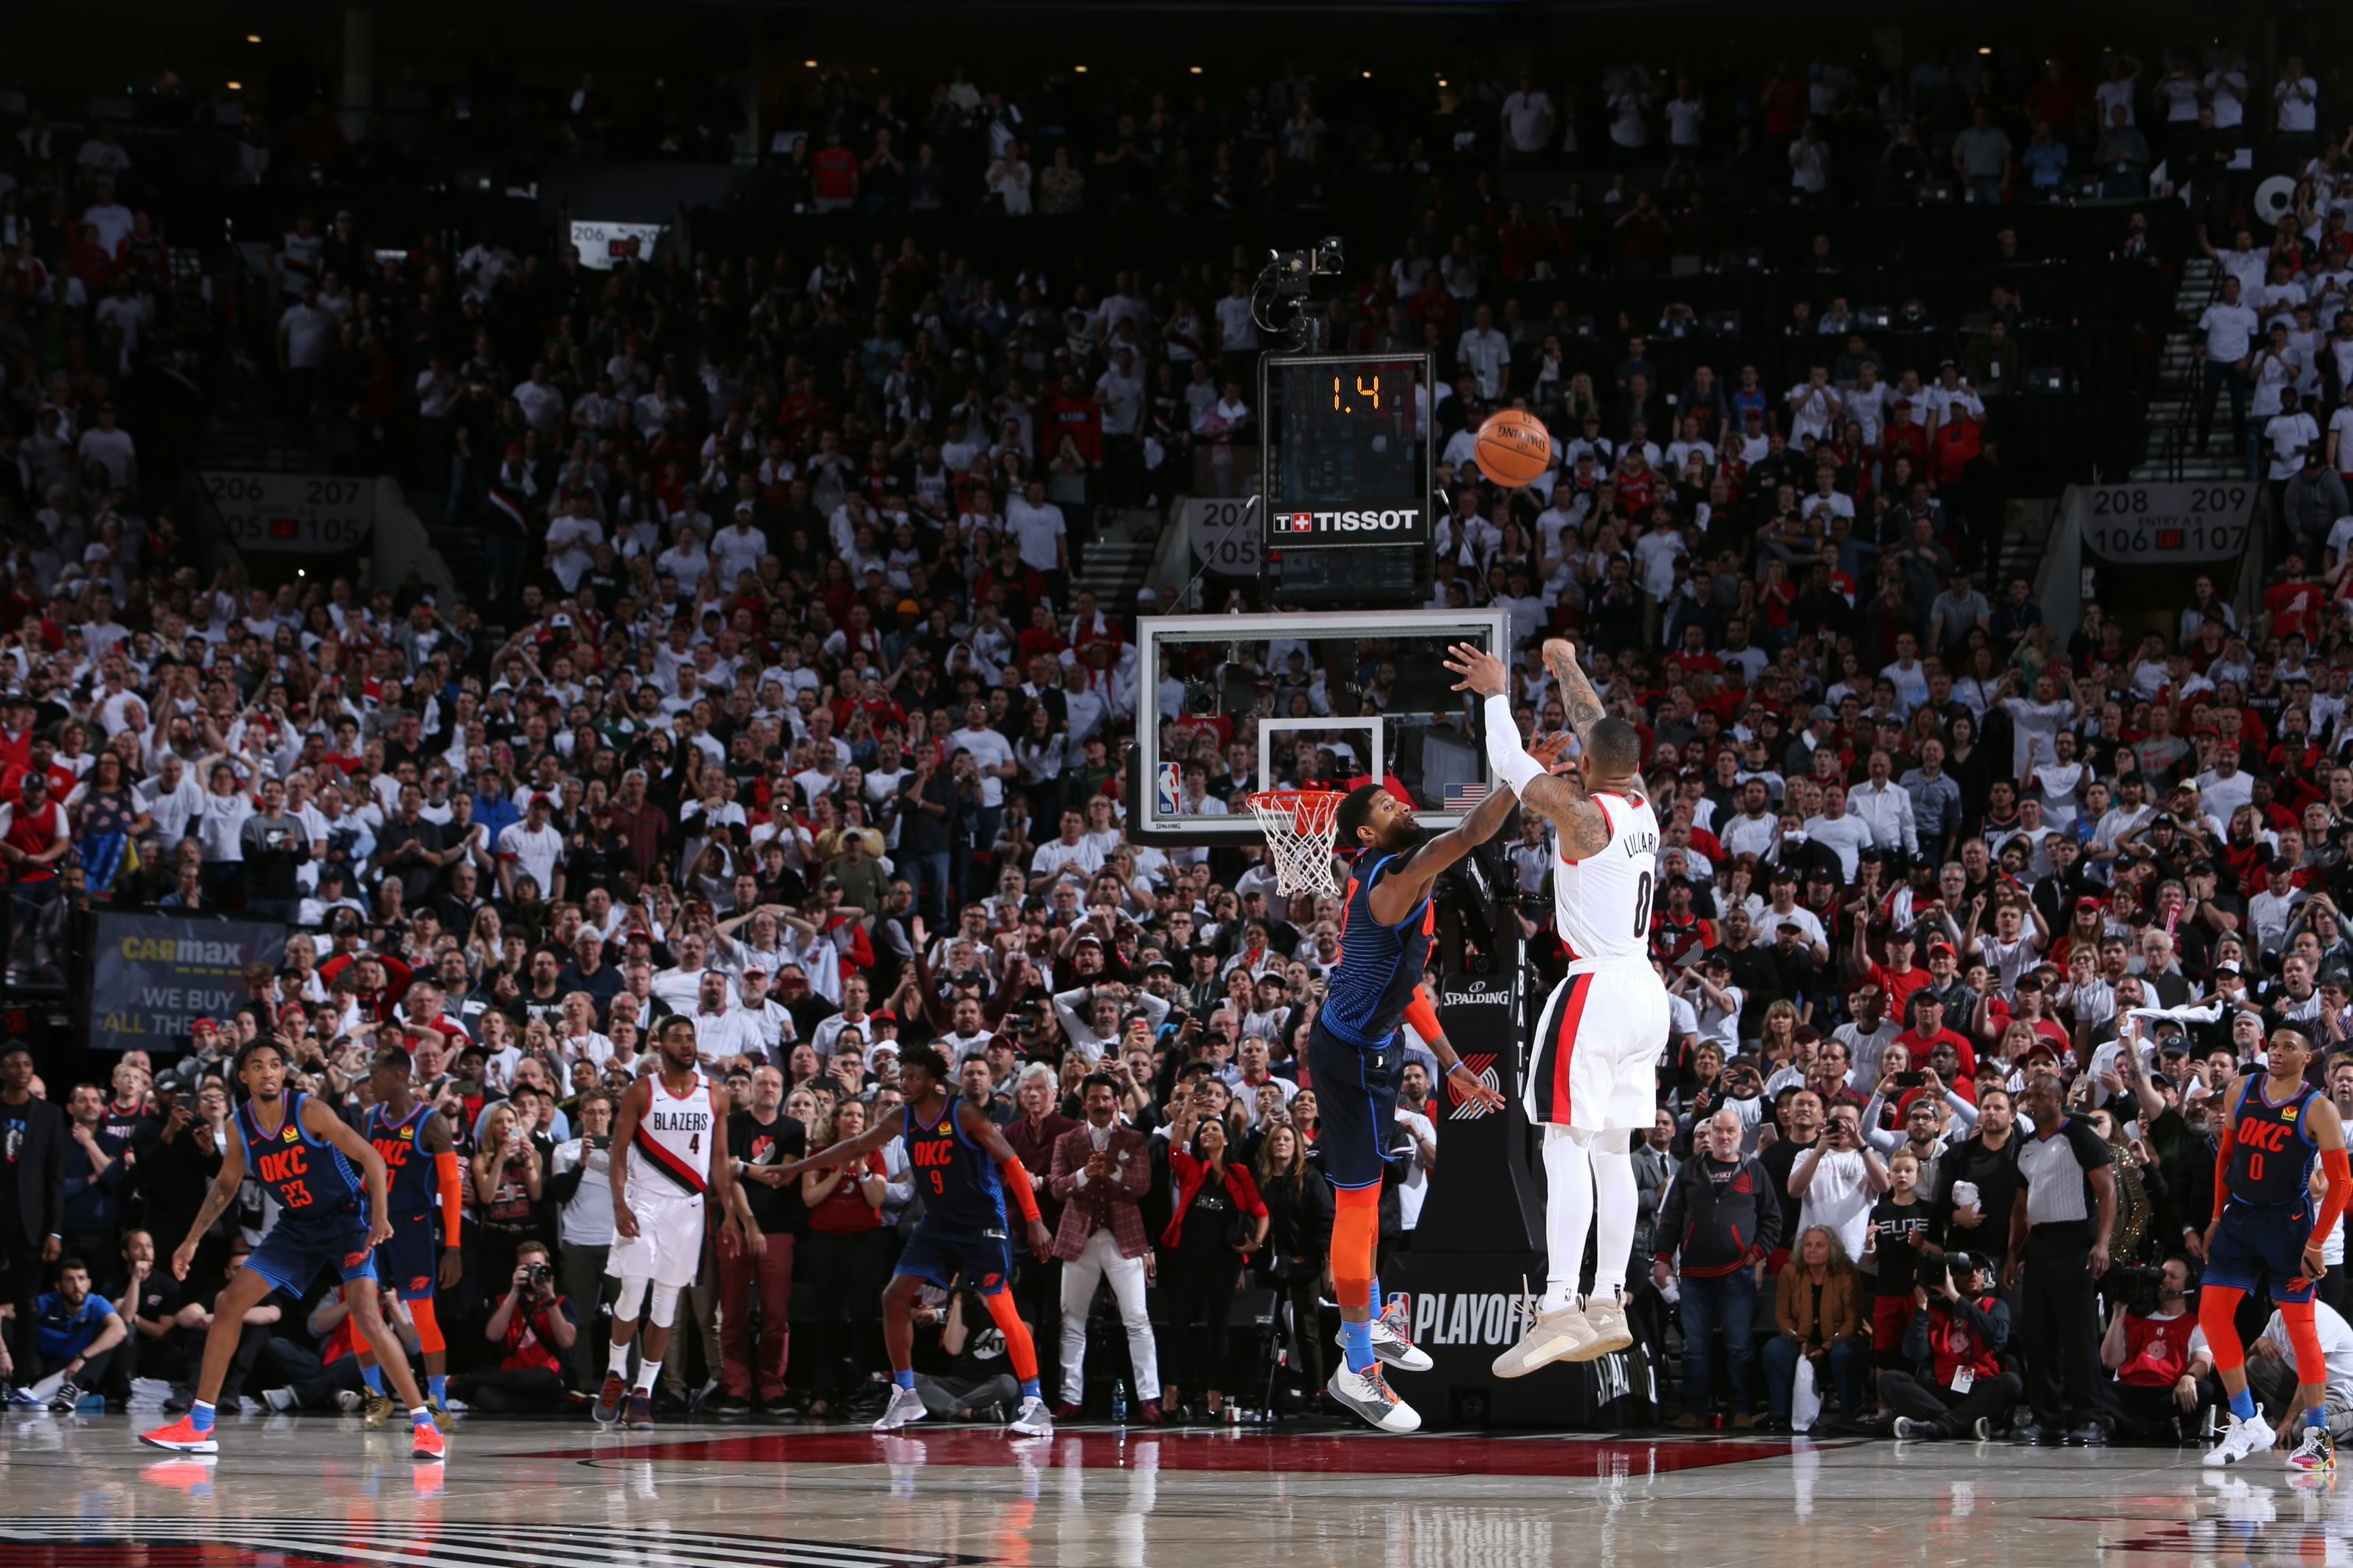 Top 5 game-winning buzzer-beaters from the 2019-20 NBA season